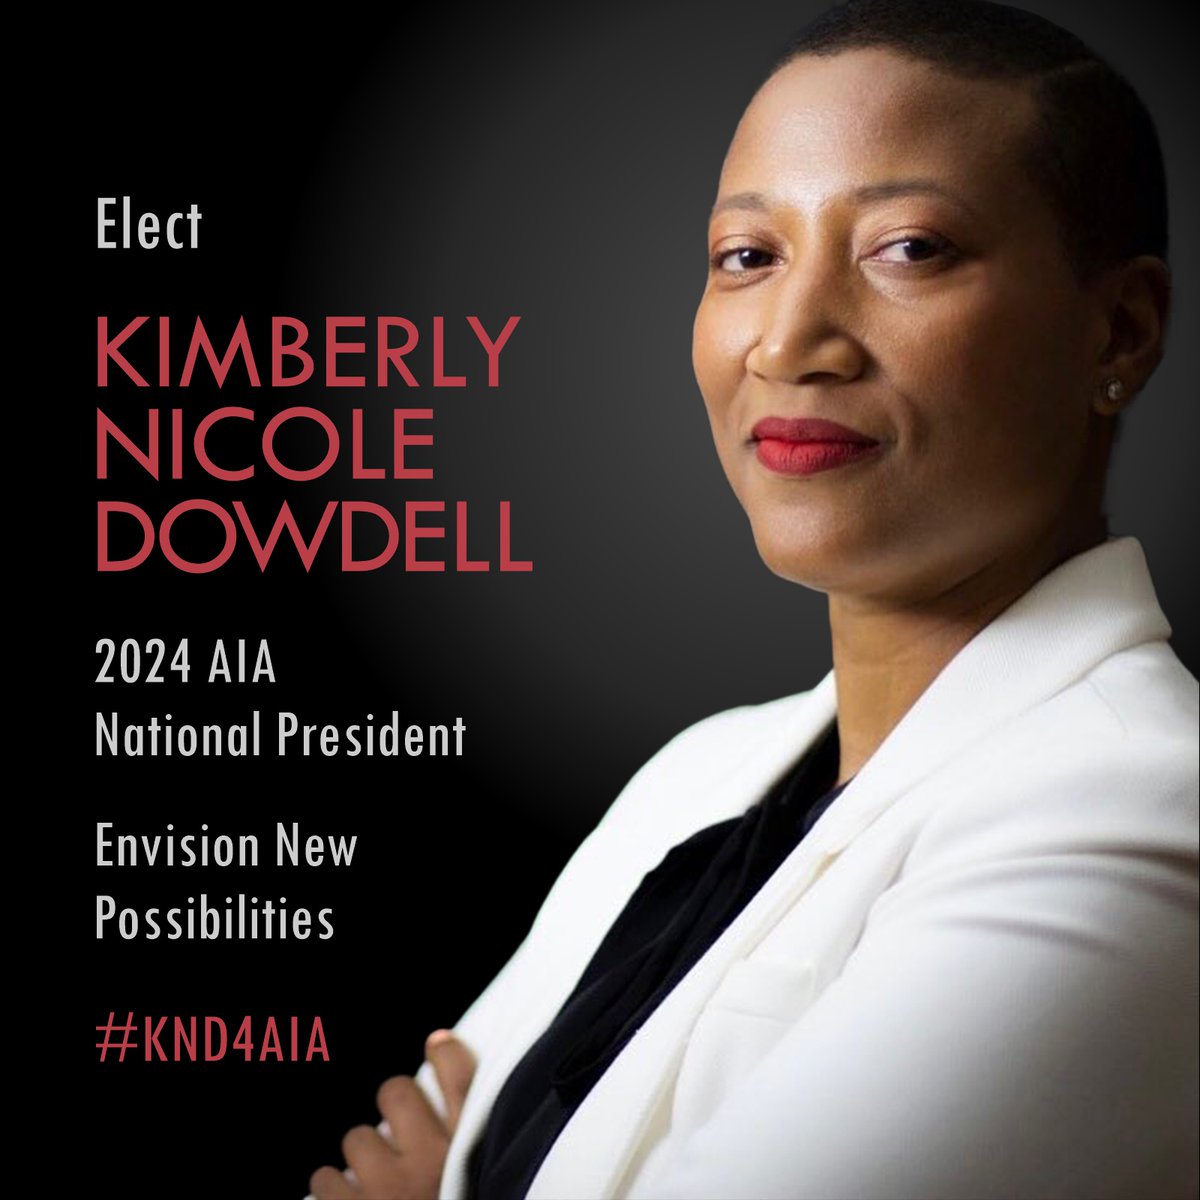 NOMA's Immediate Past-President, Kimberly Dowdell formally announces her historic  AIA National campaign at the end of BHM and the eve of WHM.

#KND4AIA #RepresentationMatters kimberlydowdell.com

#BlackArchitect #WomanArchitect #BlackWomanArchitect #WIA #leadership